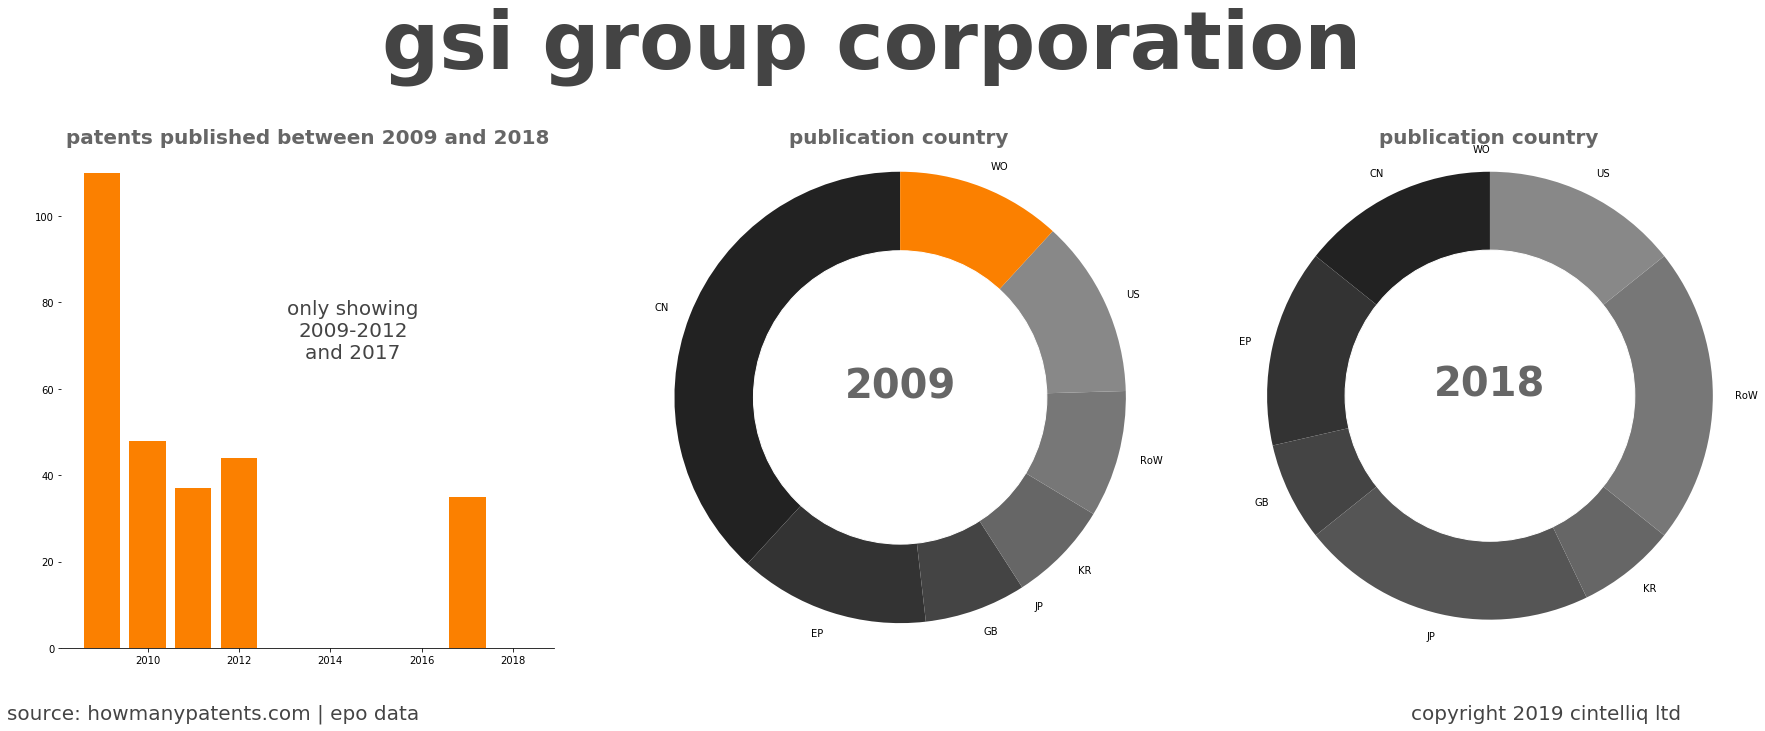 summary of patents for Gsi Group Corporation